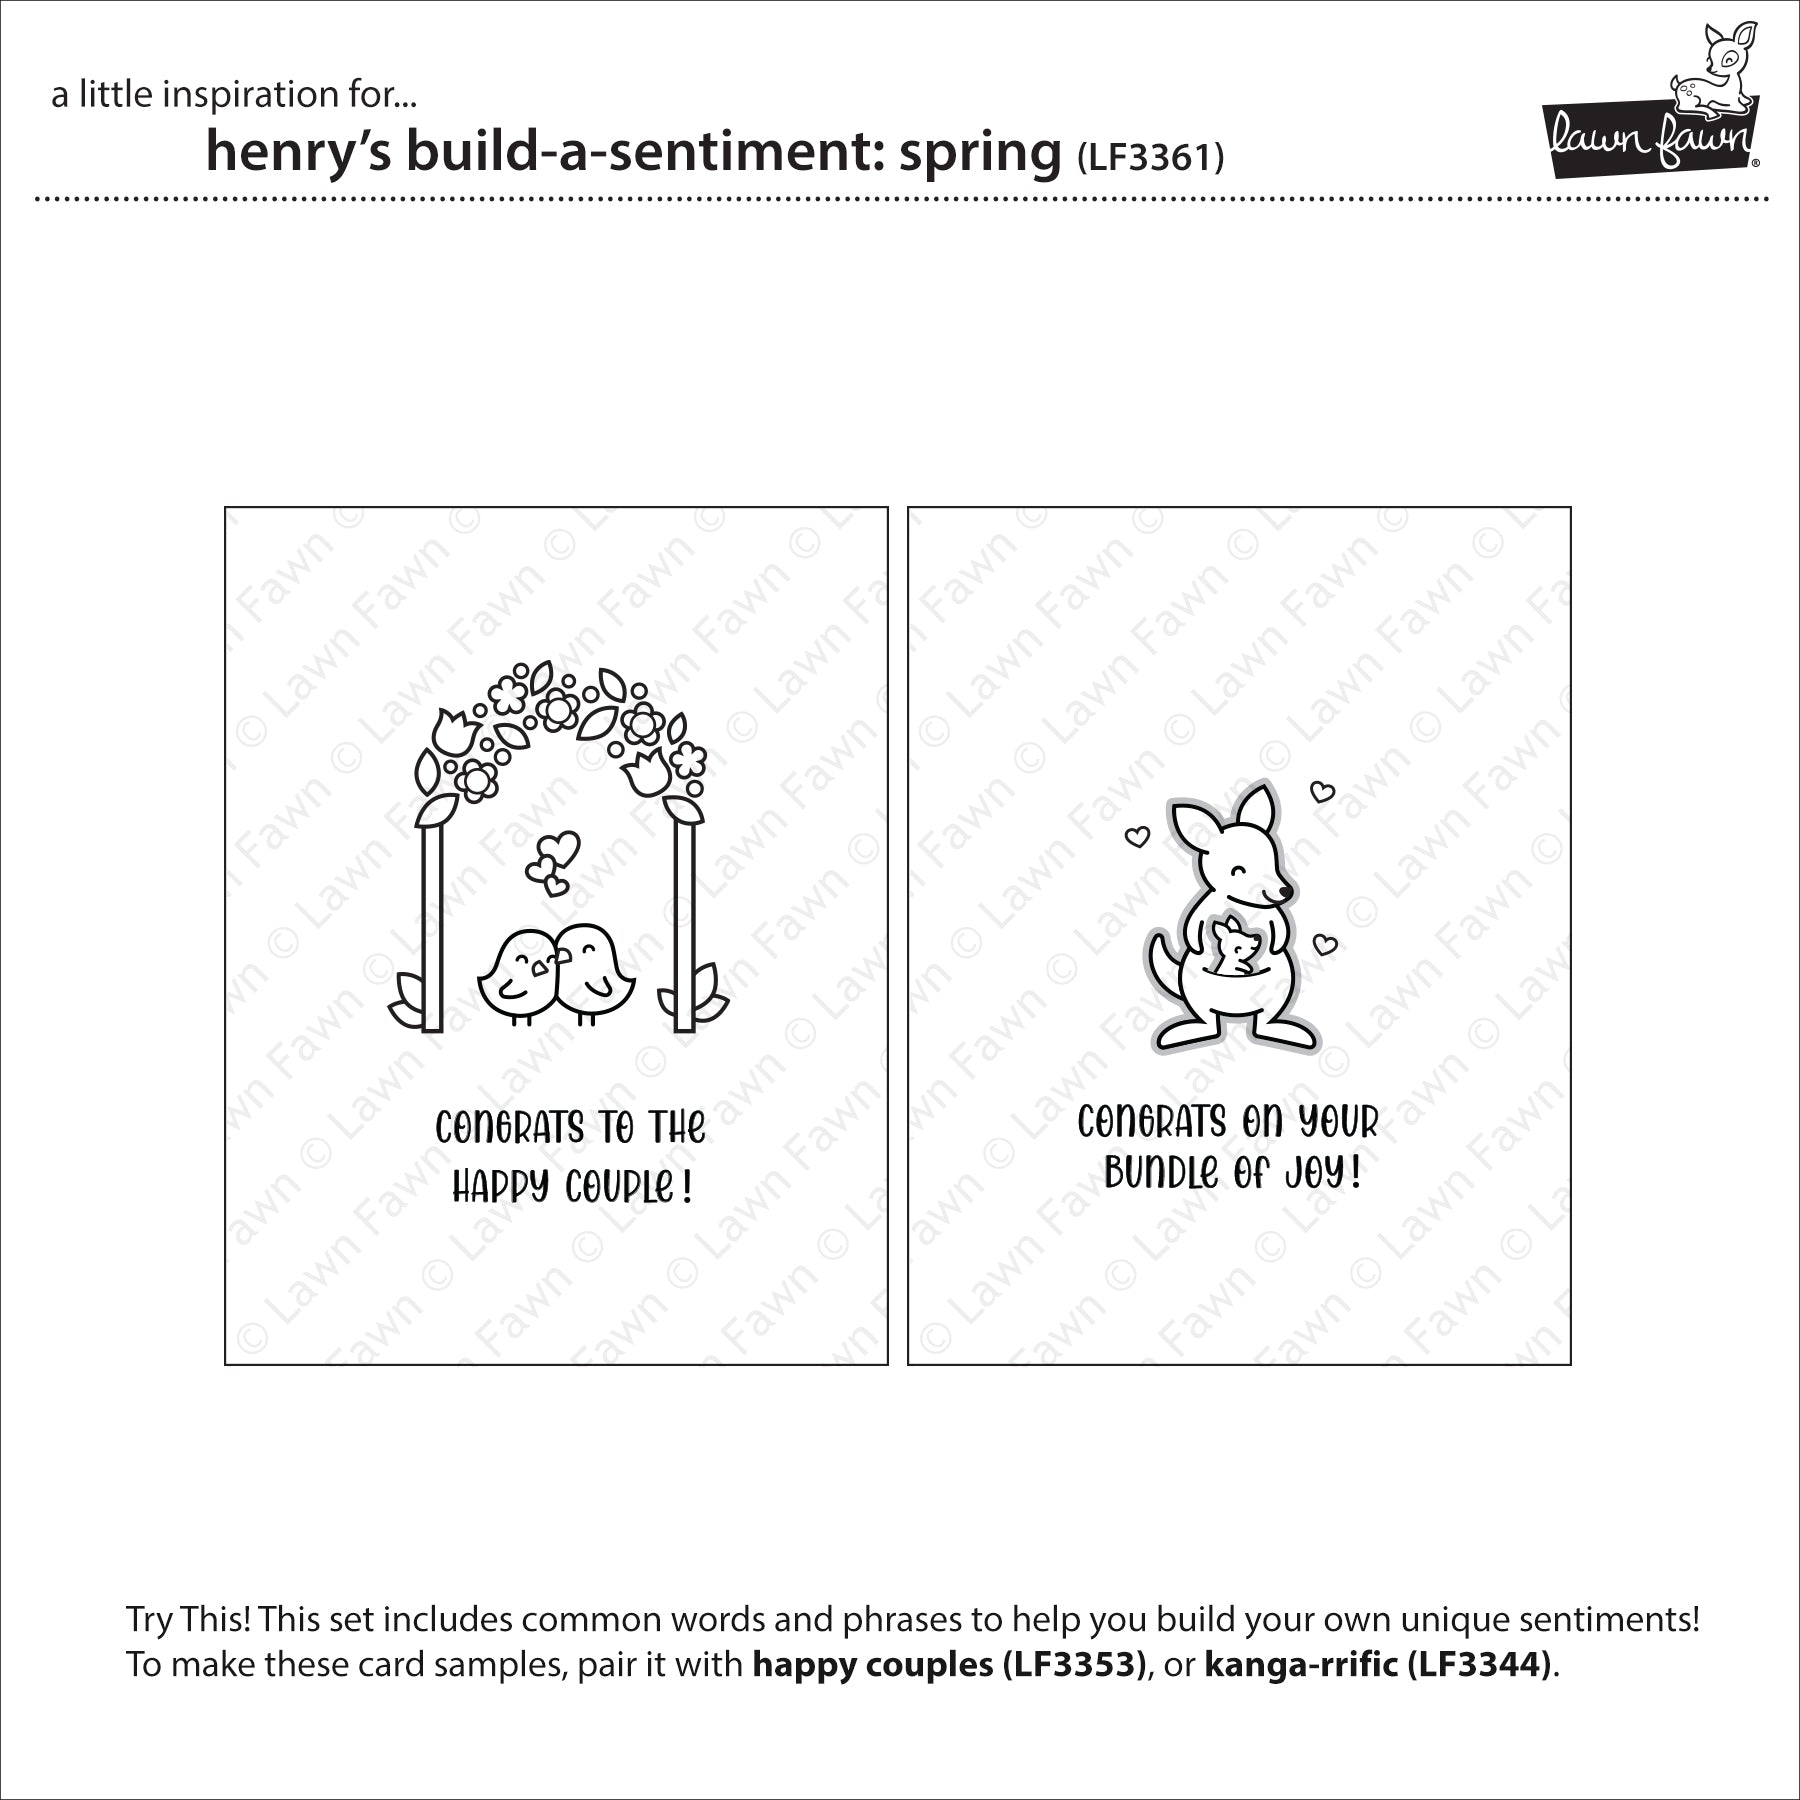 Lawn Fawn - Henry’s Build-a-Sentiment: Spring